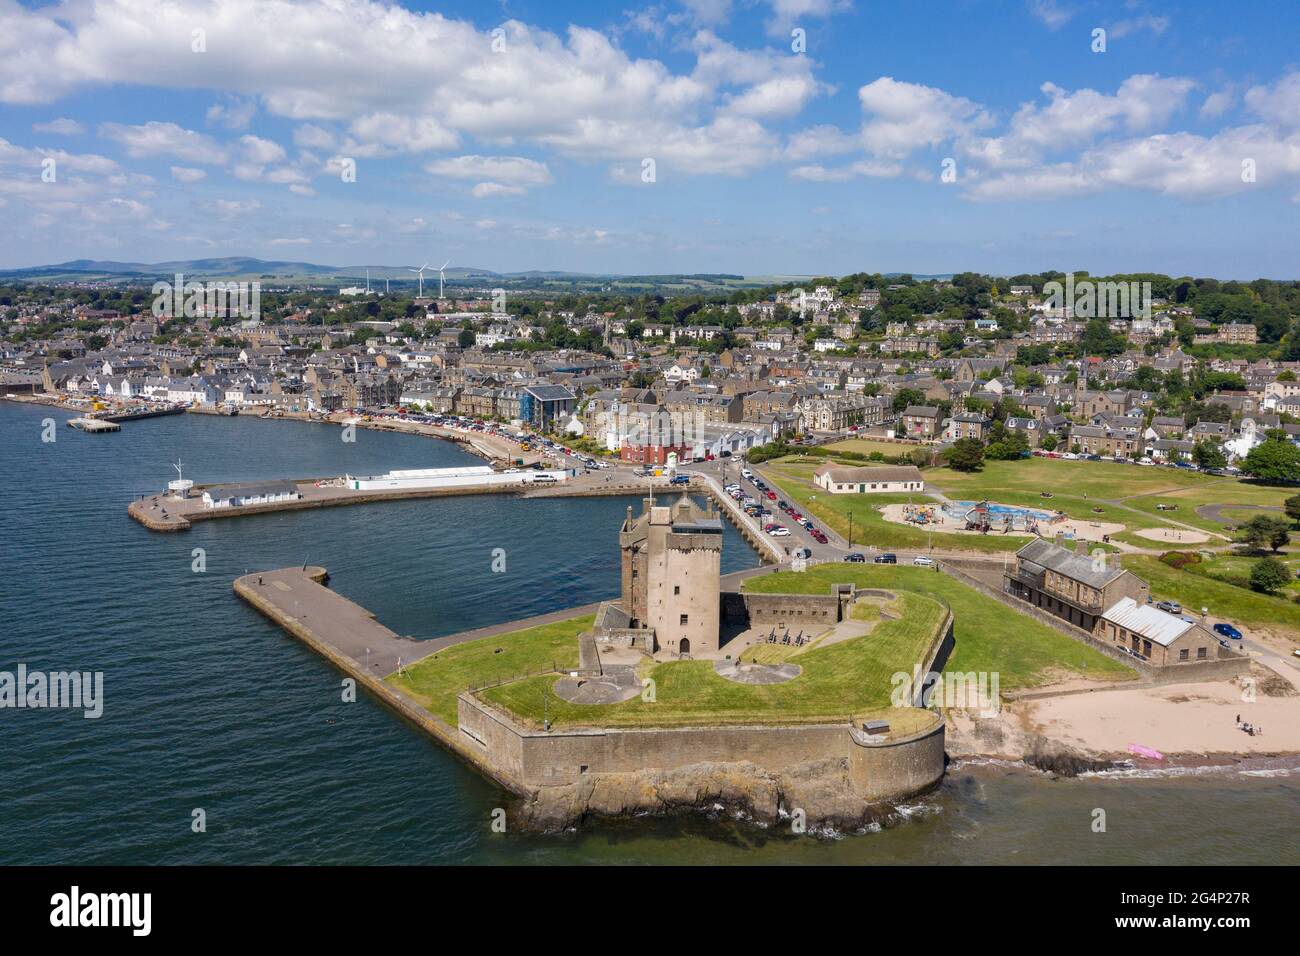 Aerial view of Broughty Ferry and Broughty Castle, Scotland. Stock Photo